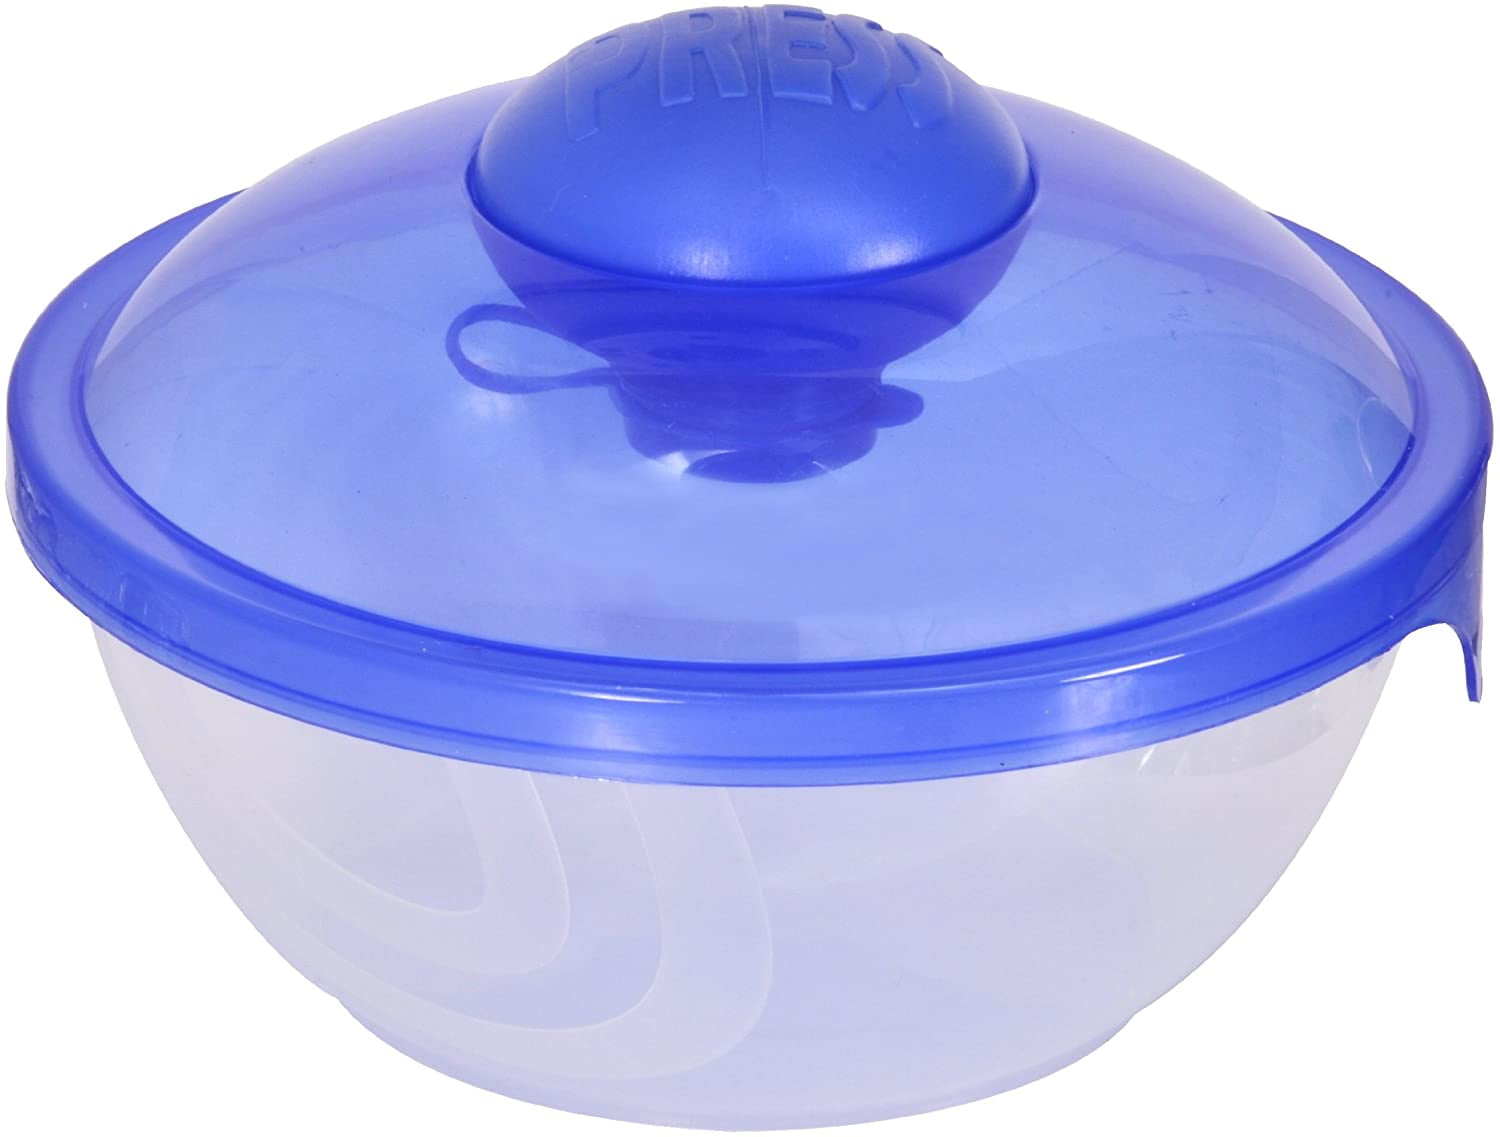 Palm Salad Bowl With Lid Blue